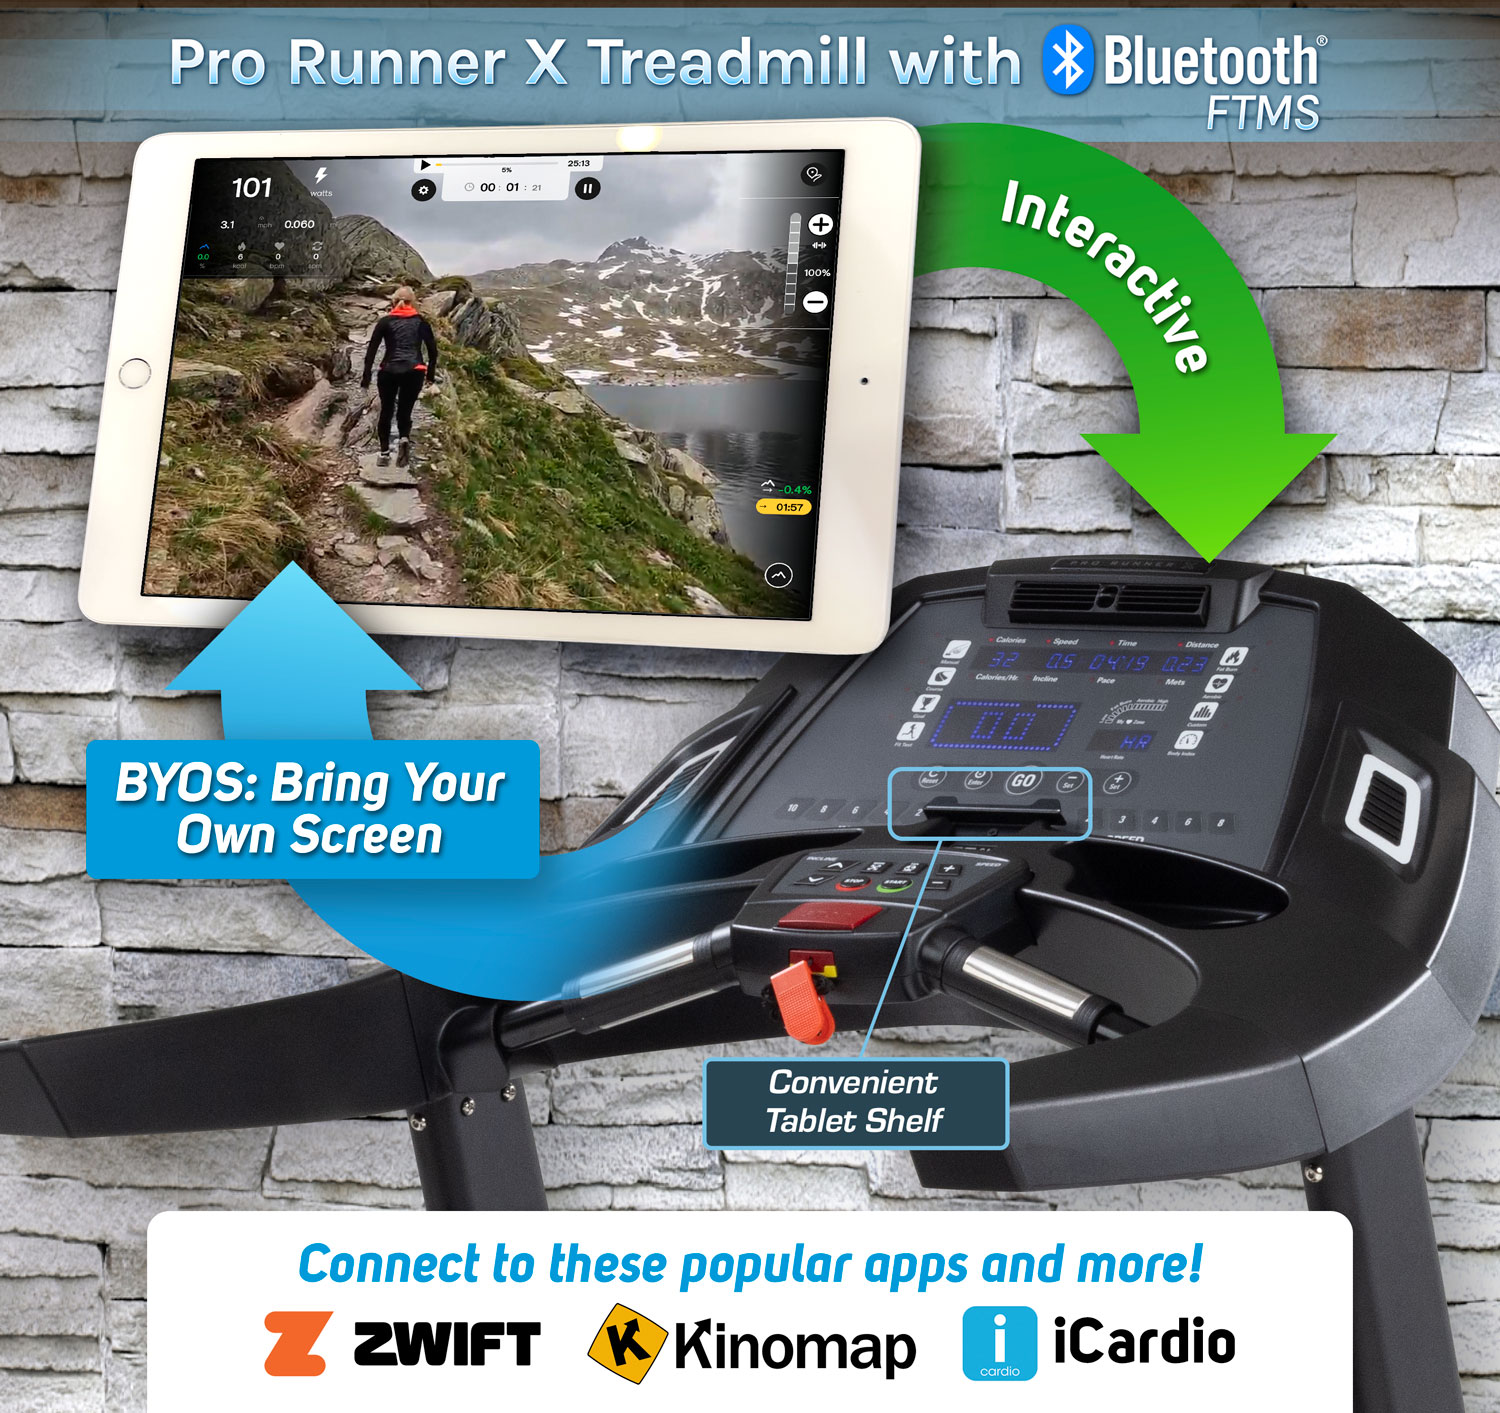 This year, consider giving the gift of health and fitness with the 3G Cardio Pro Runner Treadmill with FTMS Bluetooth.